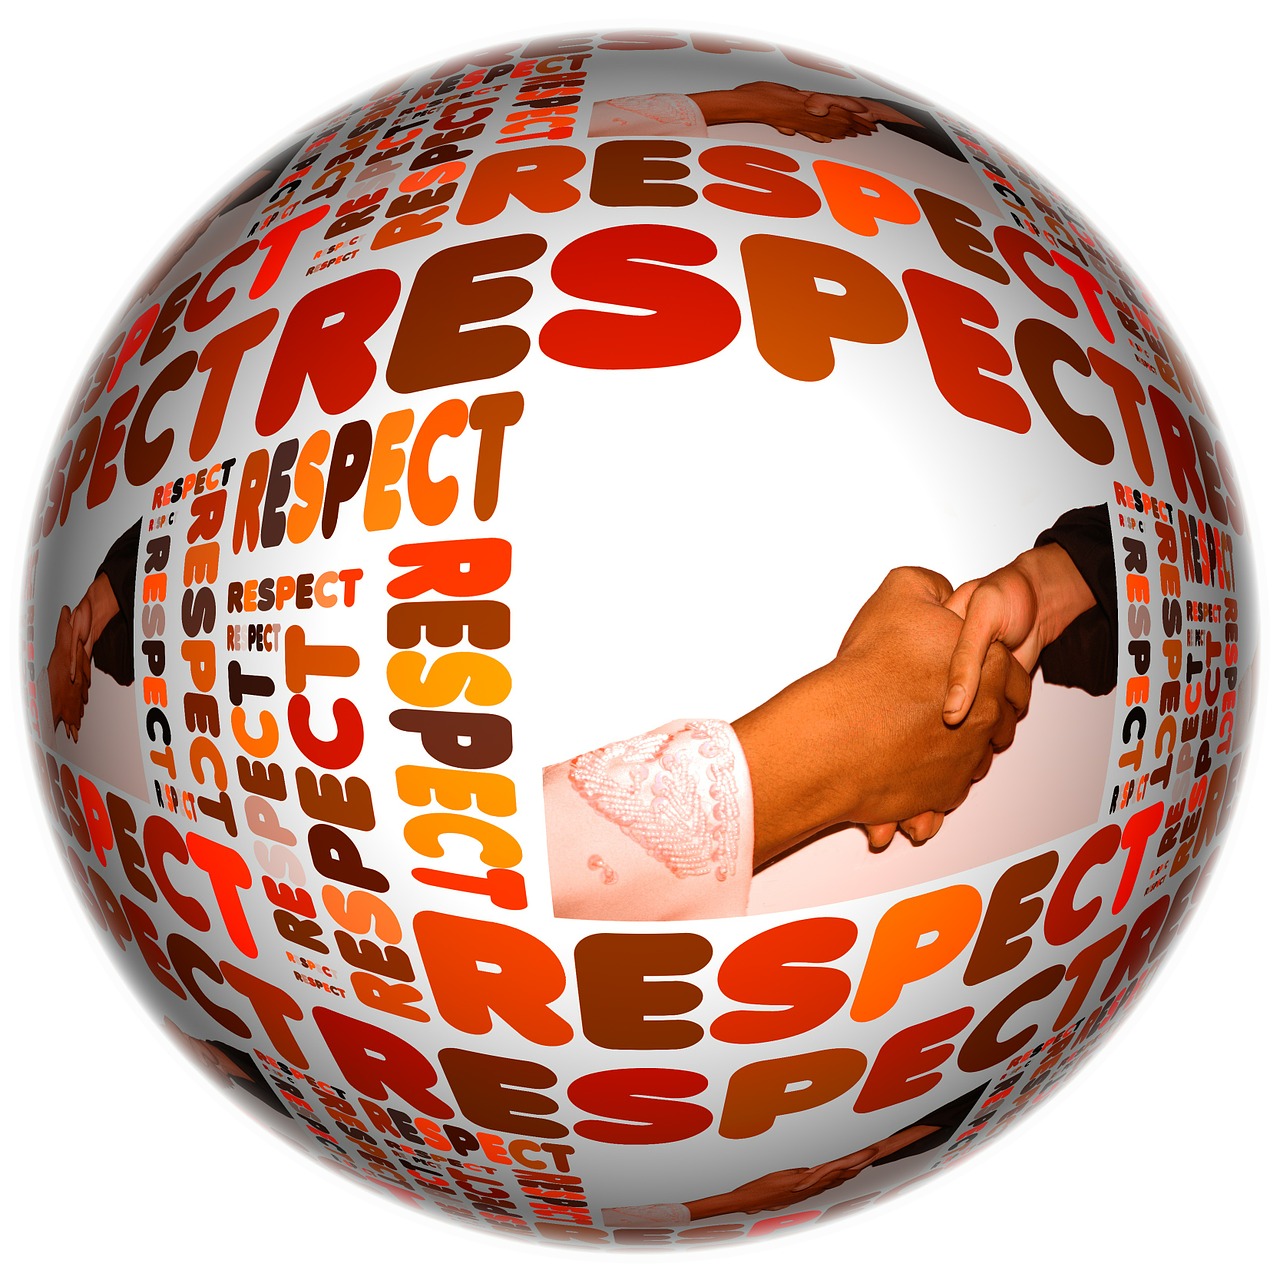 A round circle with the image of two hands shaking (as in colleagues) surrounded by the word respect in different sizes with the color of the letters ranging from red, brown, to orange and gold.